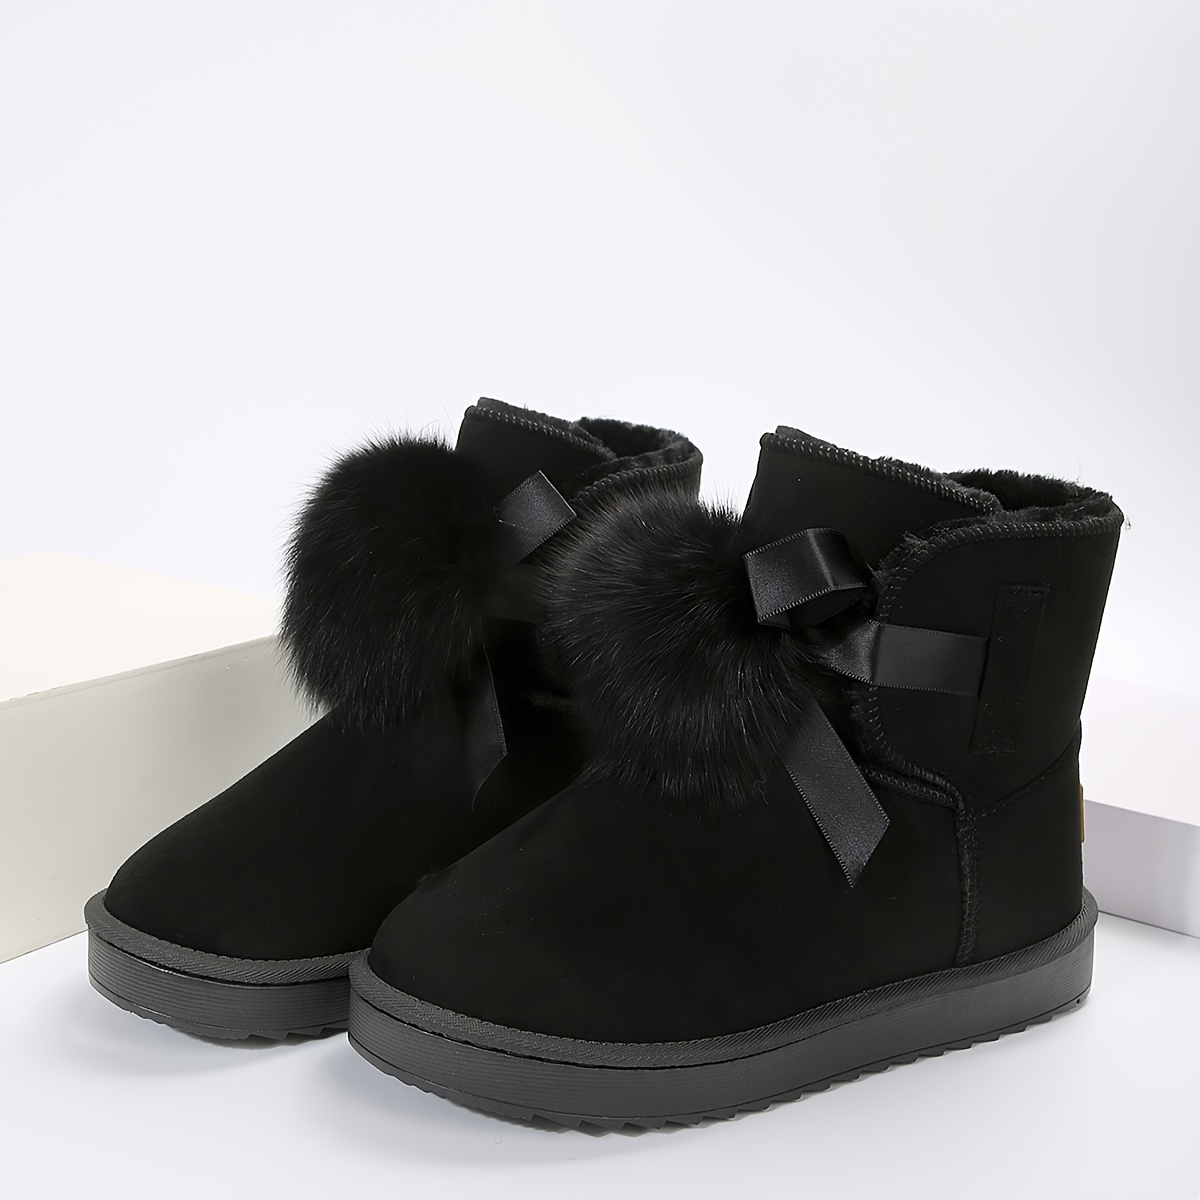 Women's Solid Color Fluffy Boots Slip Thermal Lined Platform ...